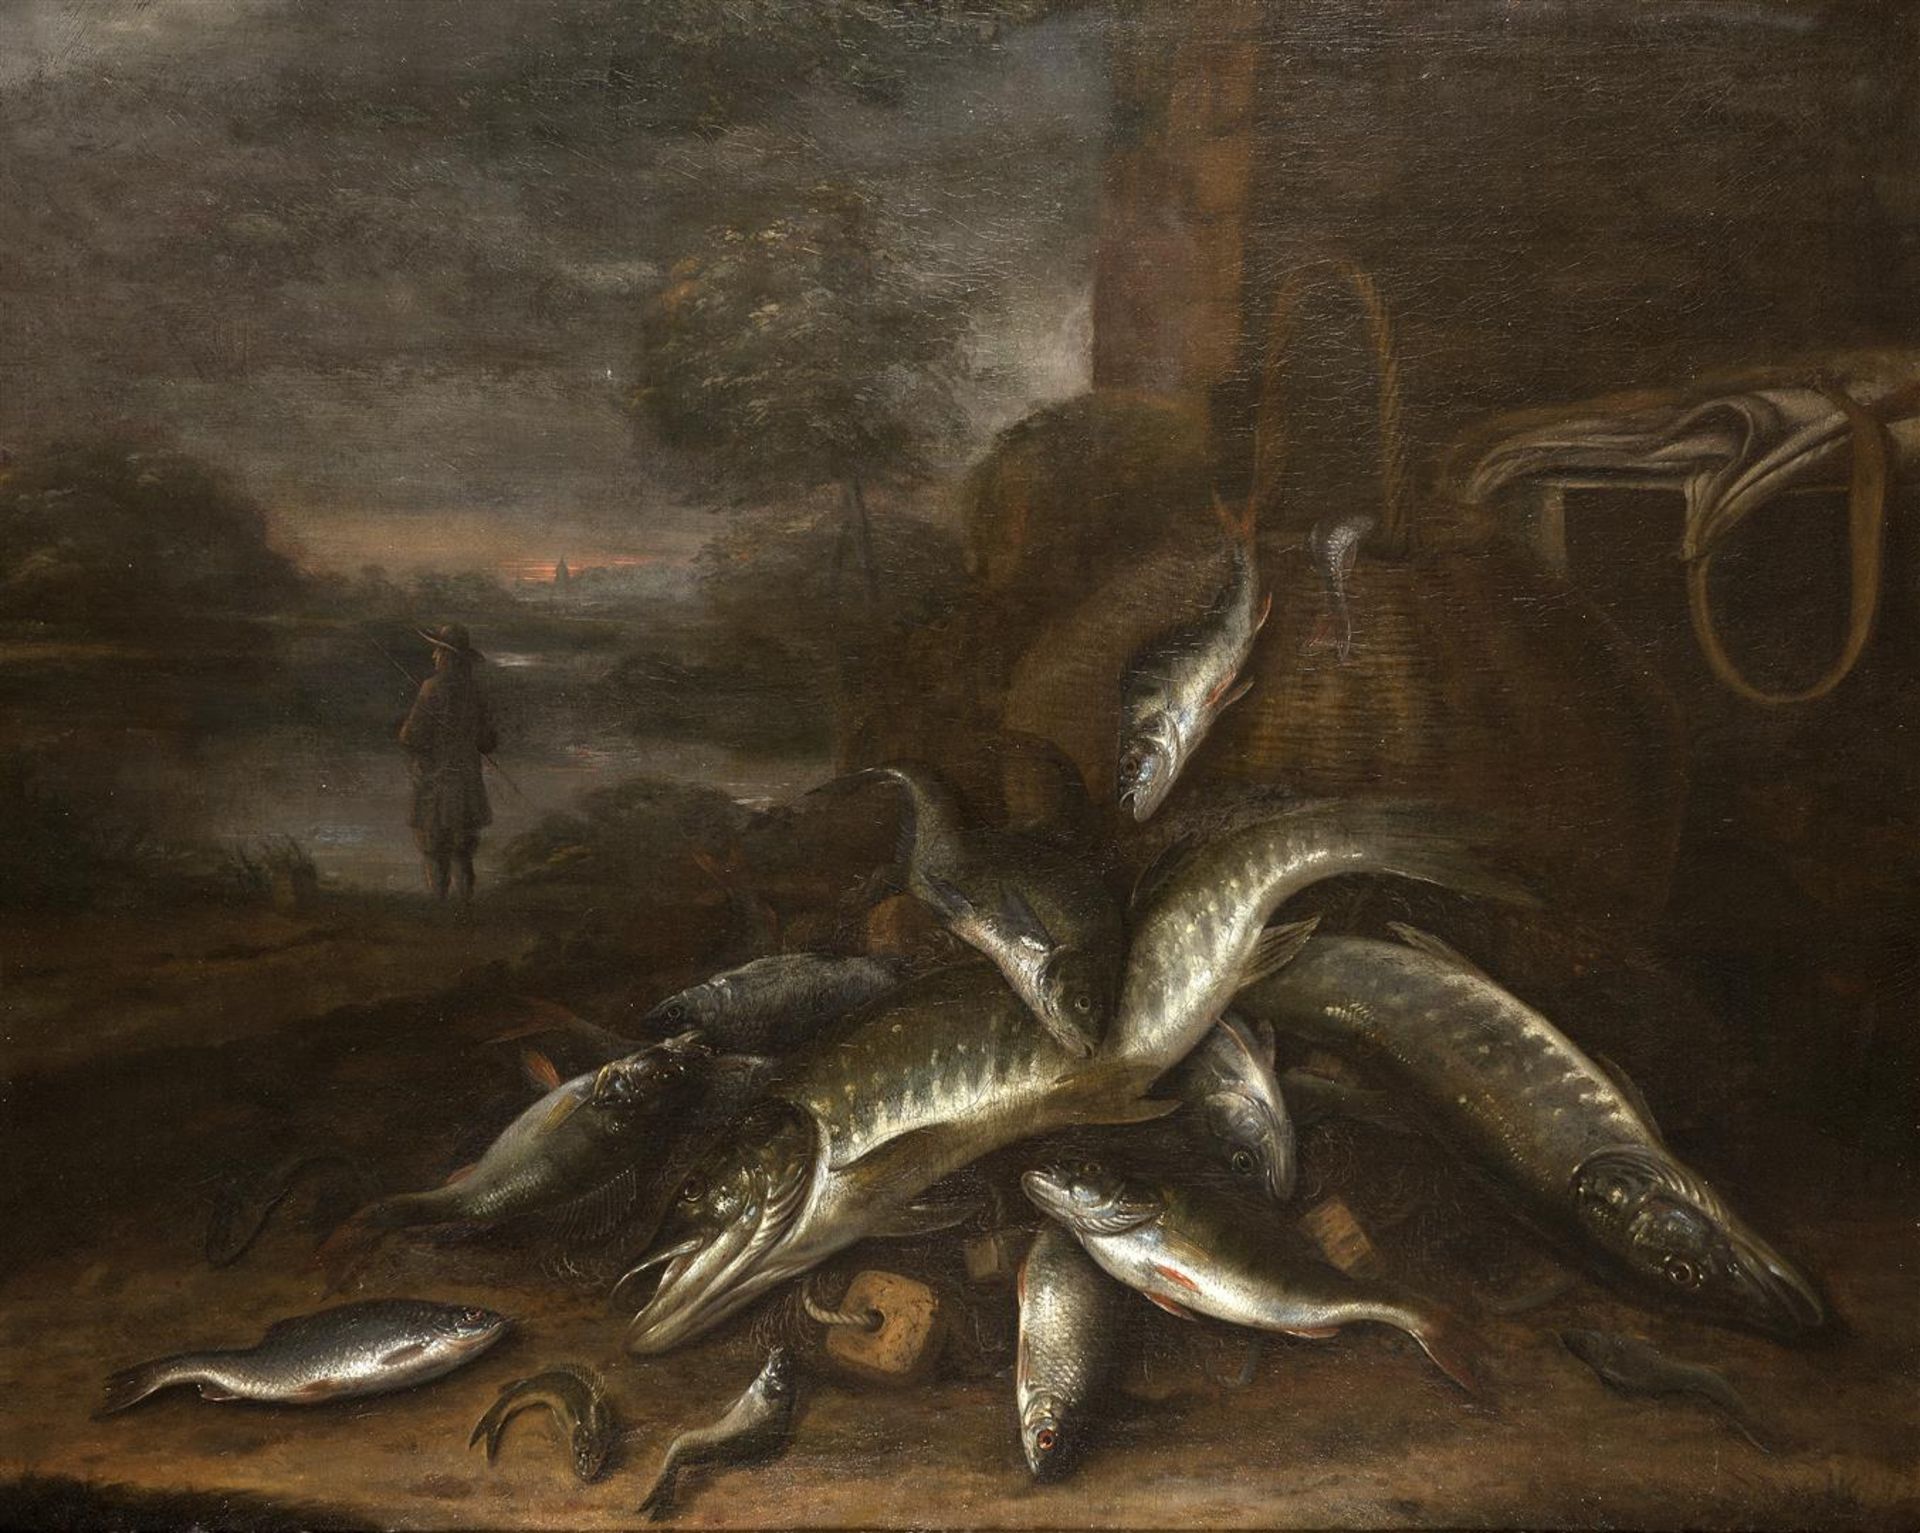 Jacob Gillig (1636-1701) 'Still life of fish in a landscape', signed lower right, canvas. H. 90